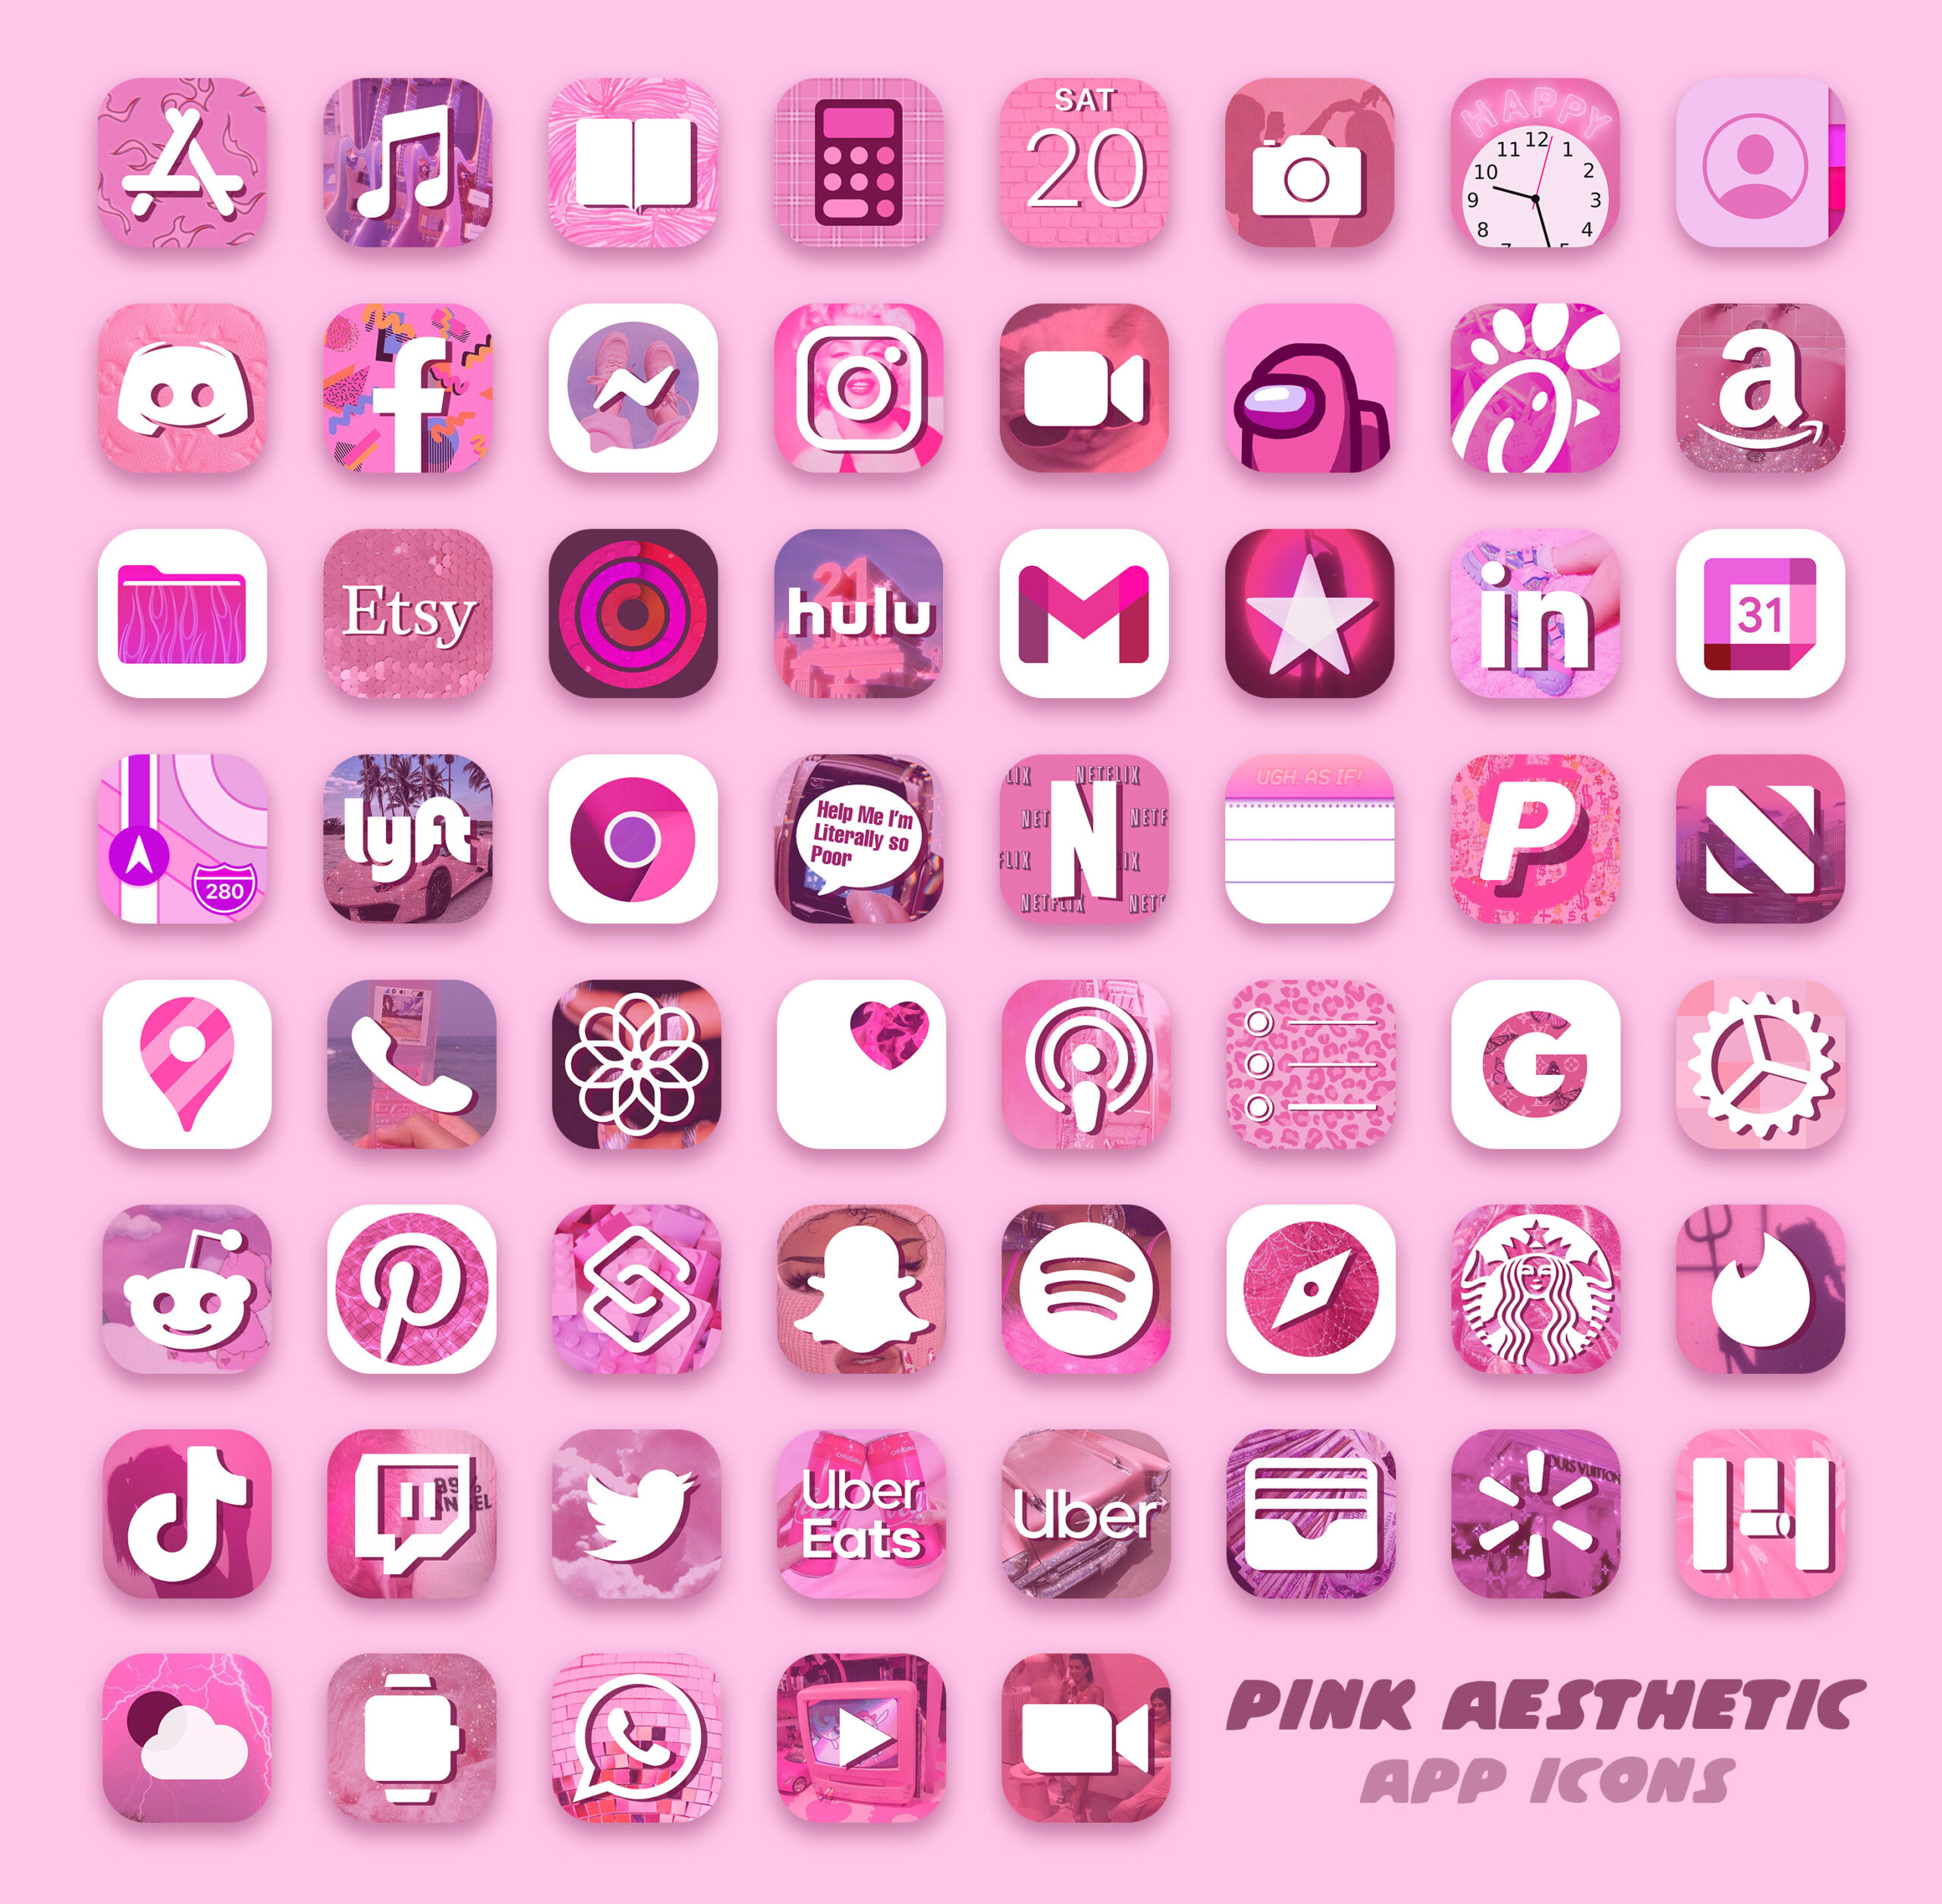 pink aesthetic app icons pack preview 3